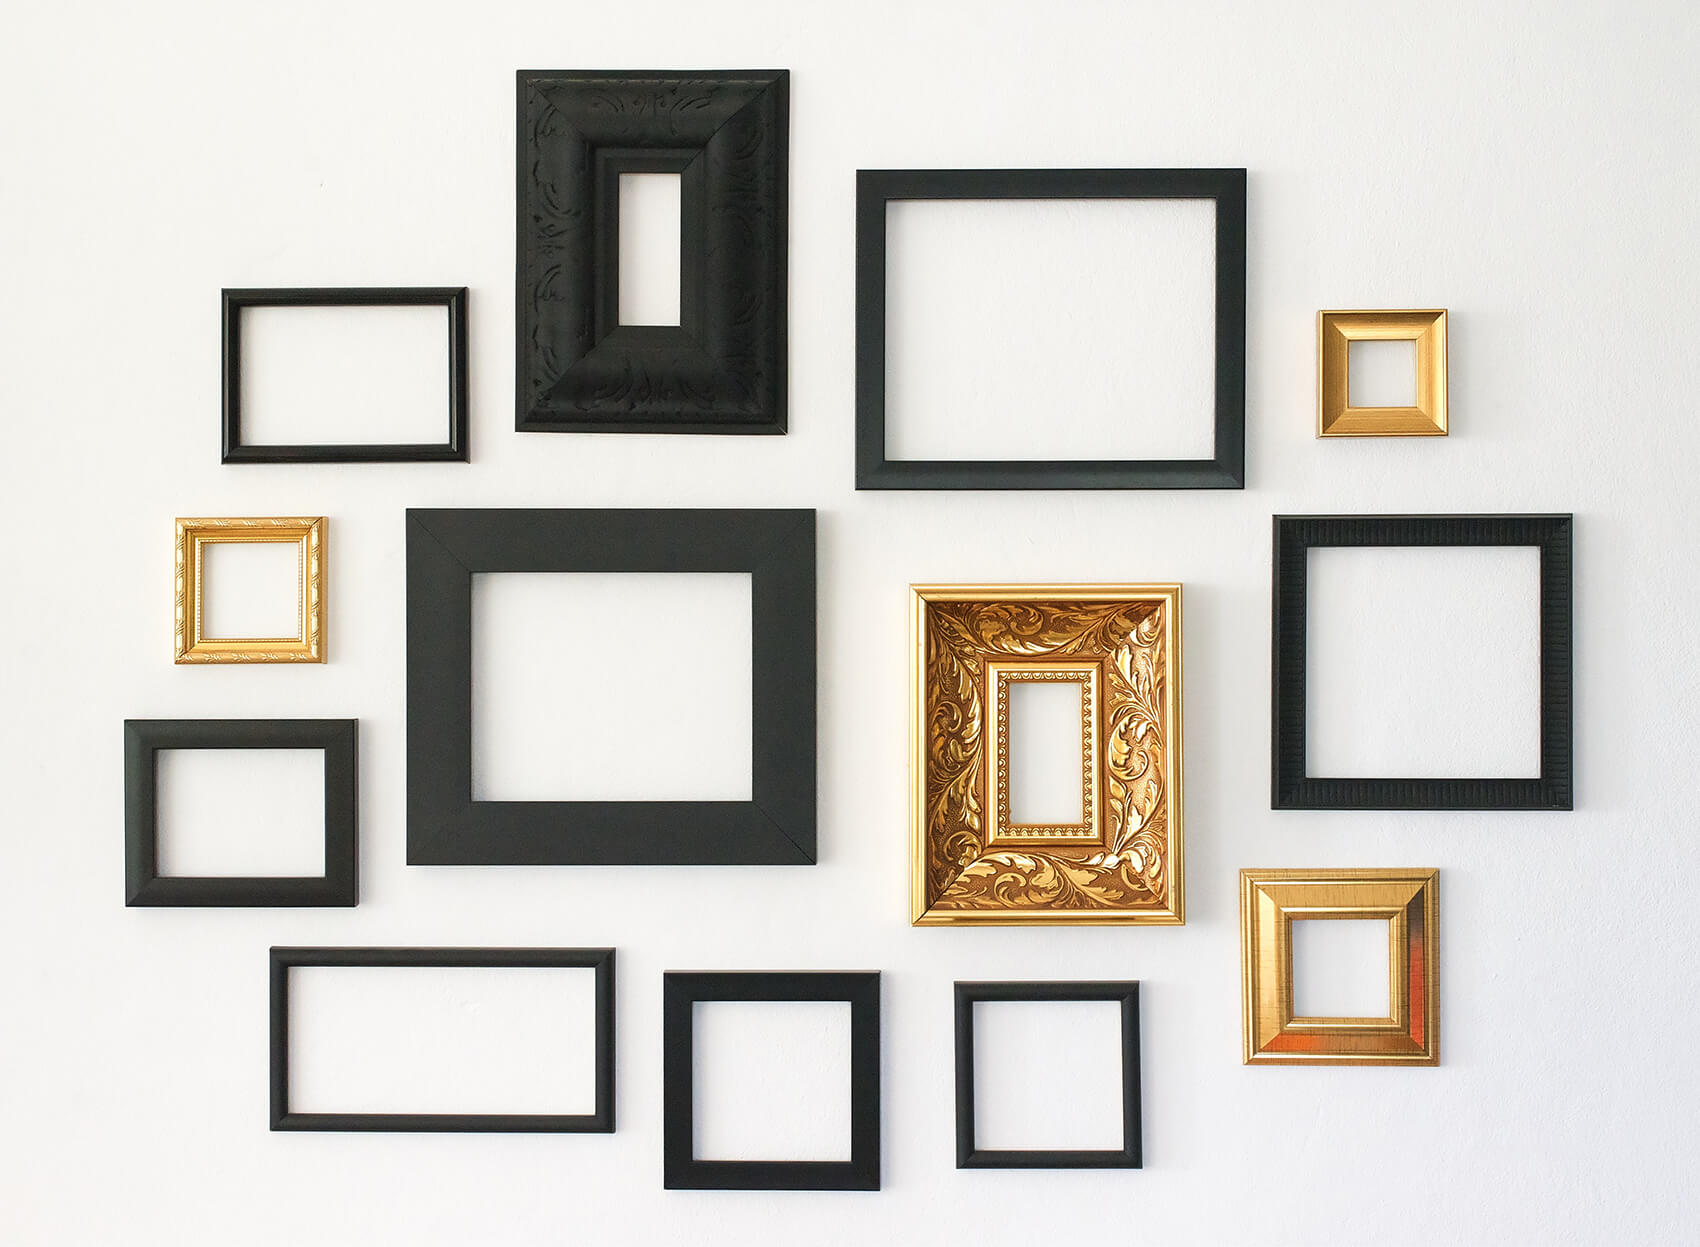 Picture frames